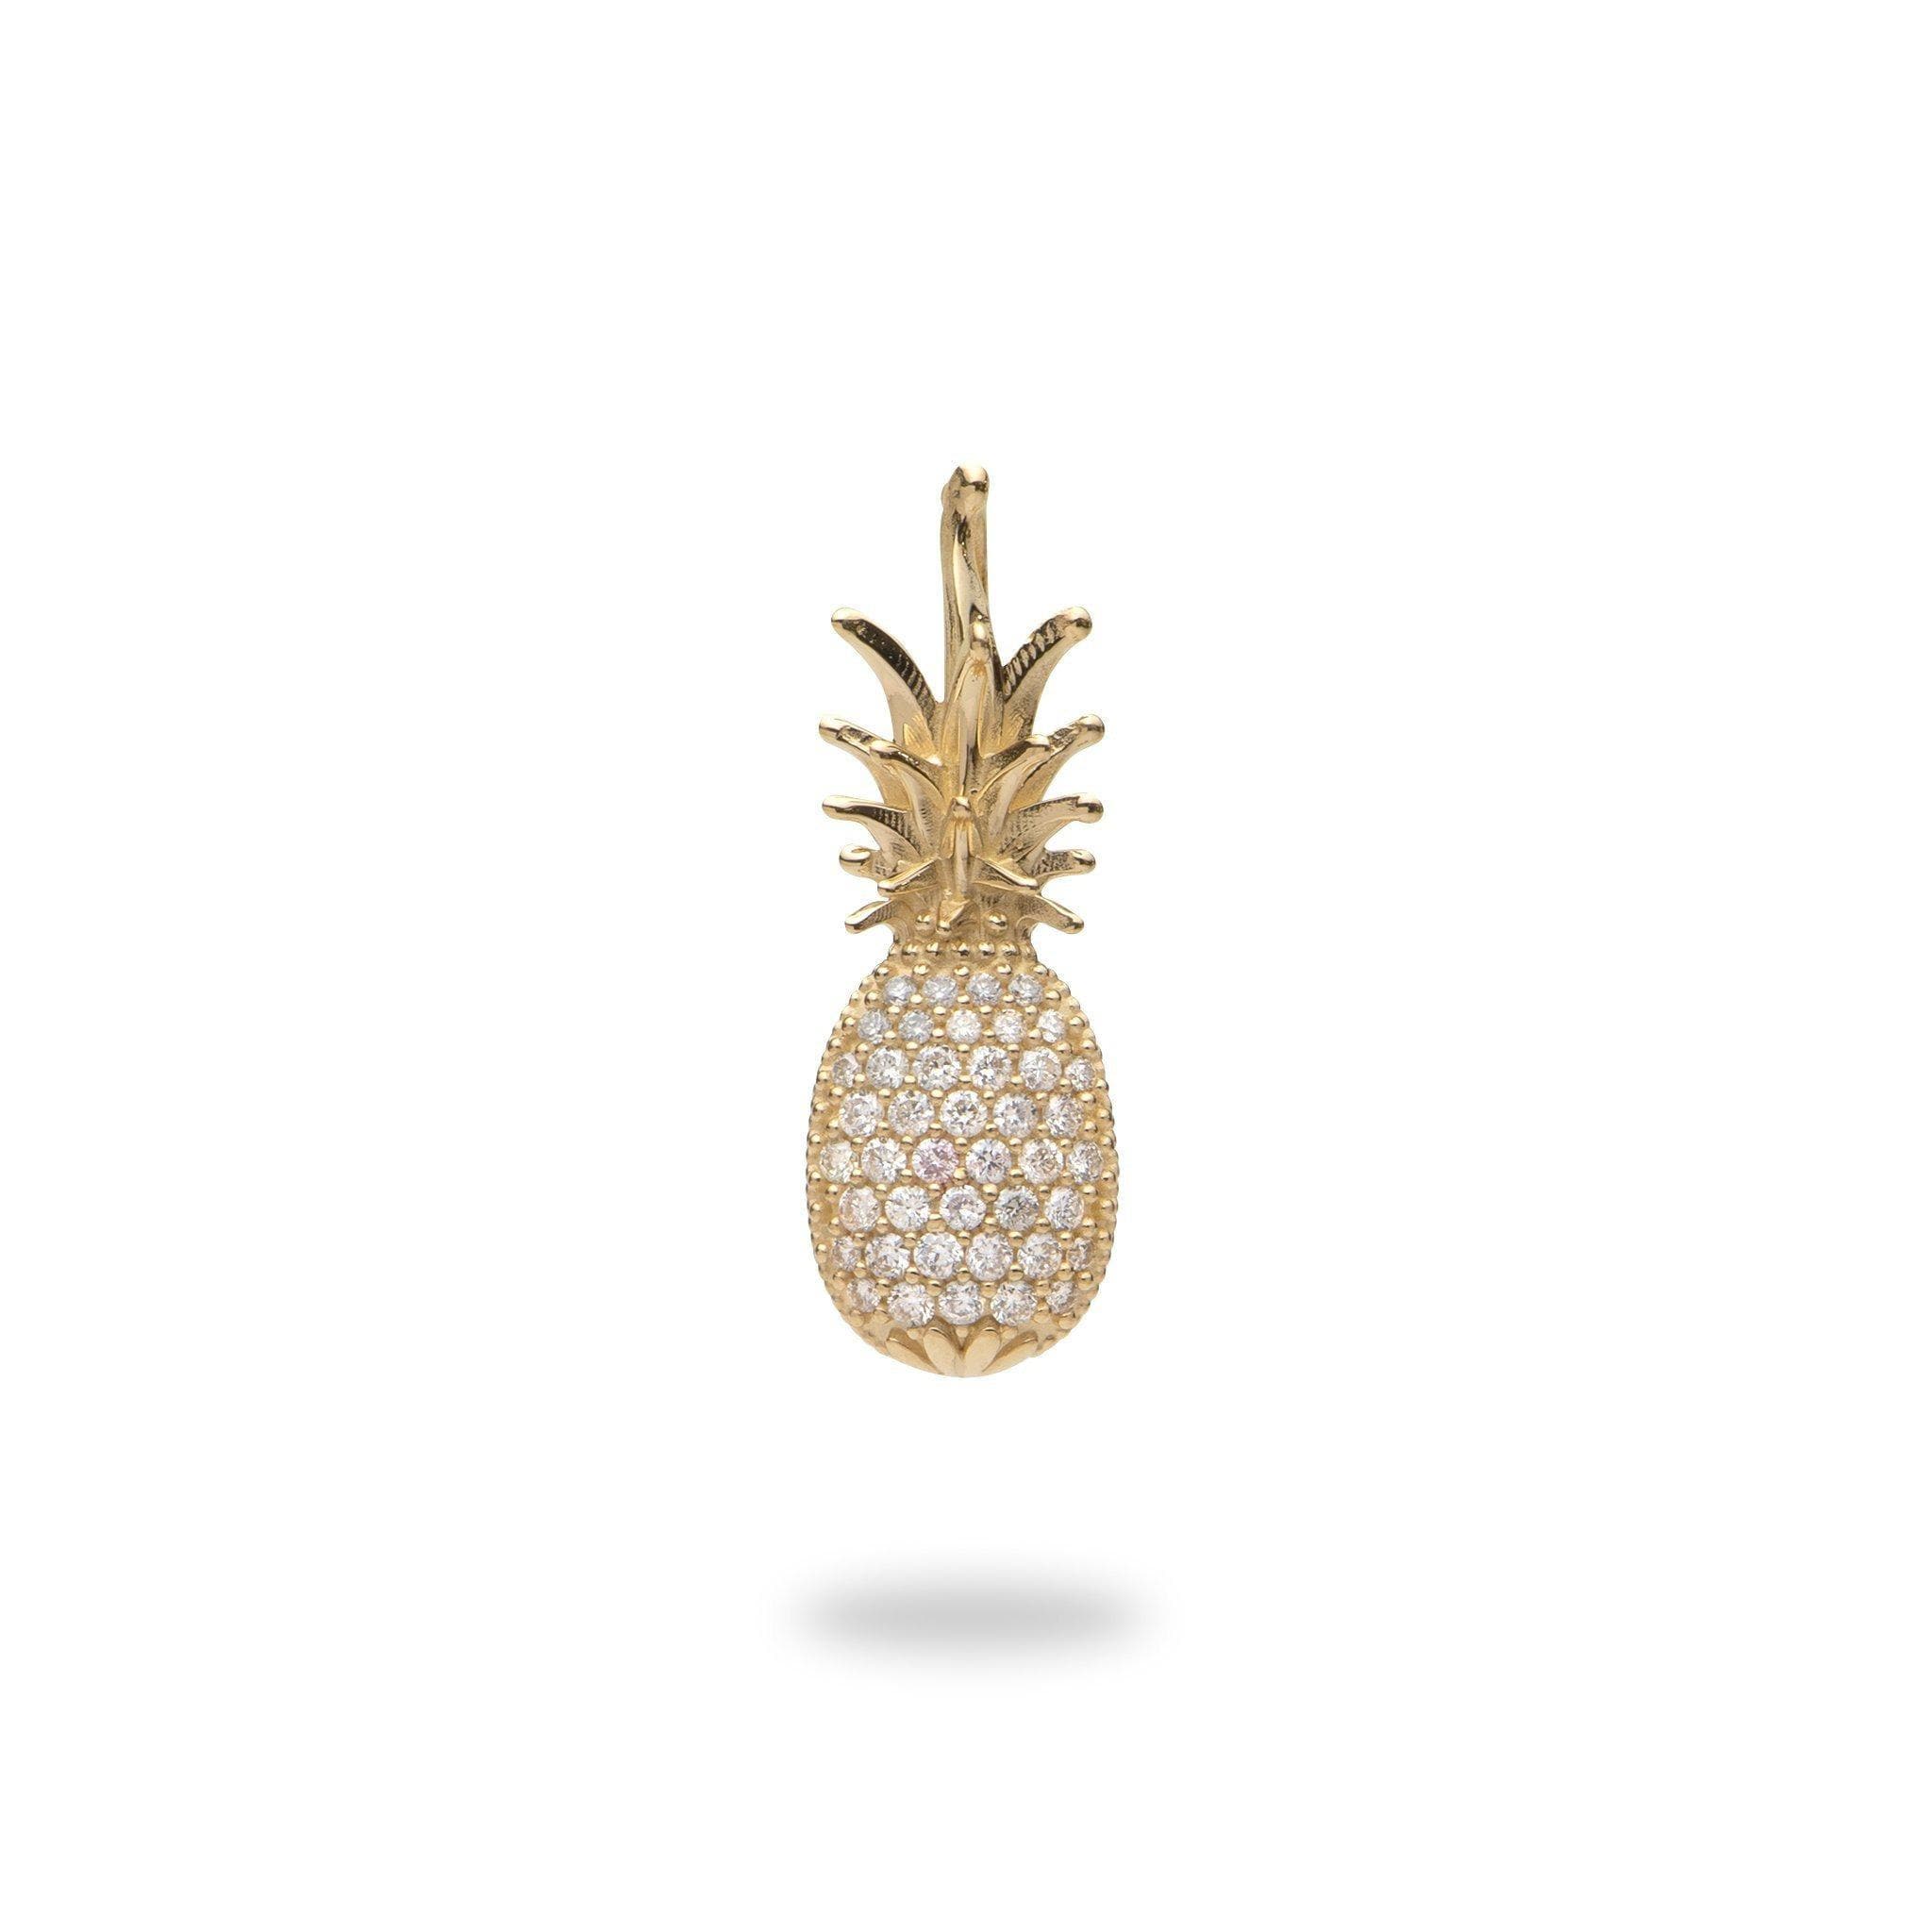 Small Pineapple Pendant in Gold with Diamonds